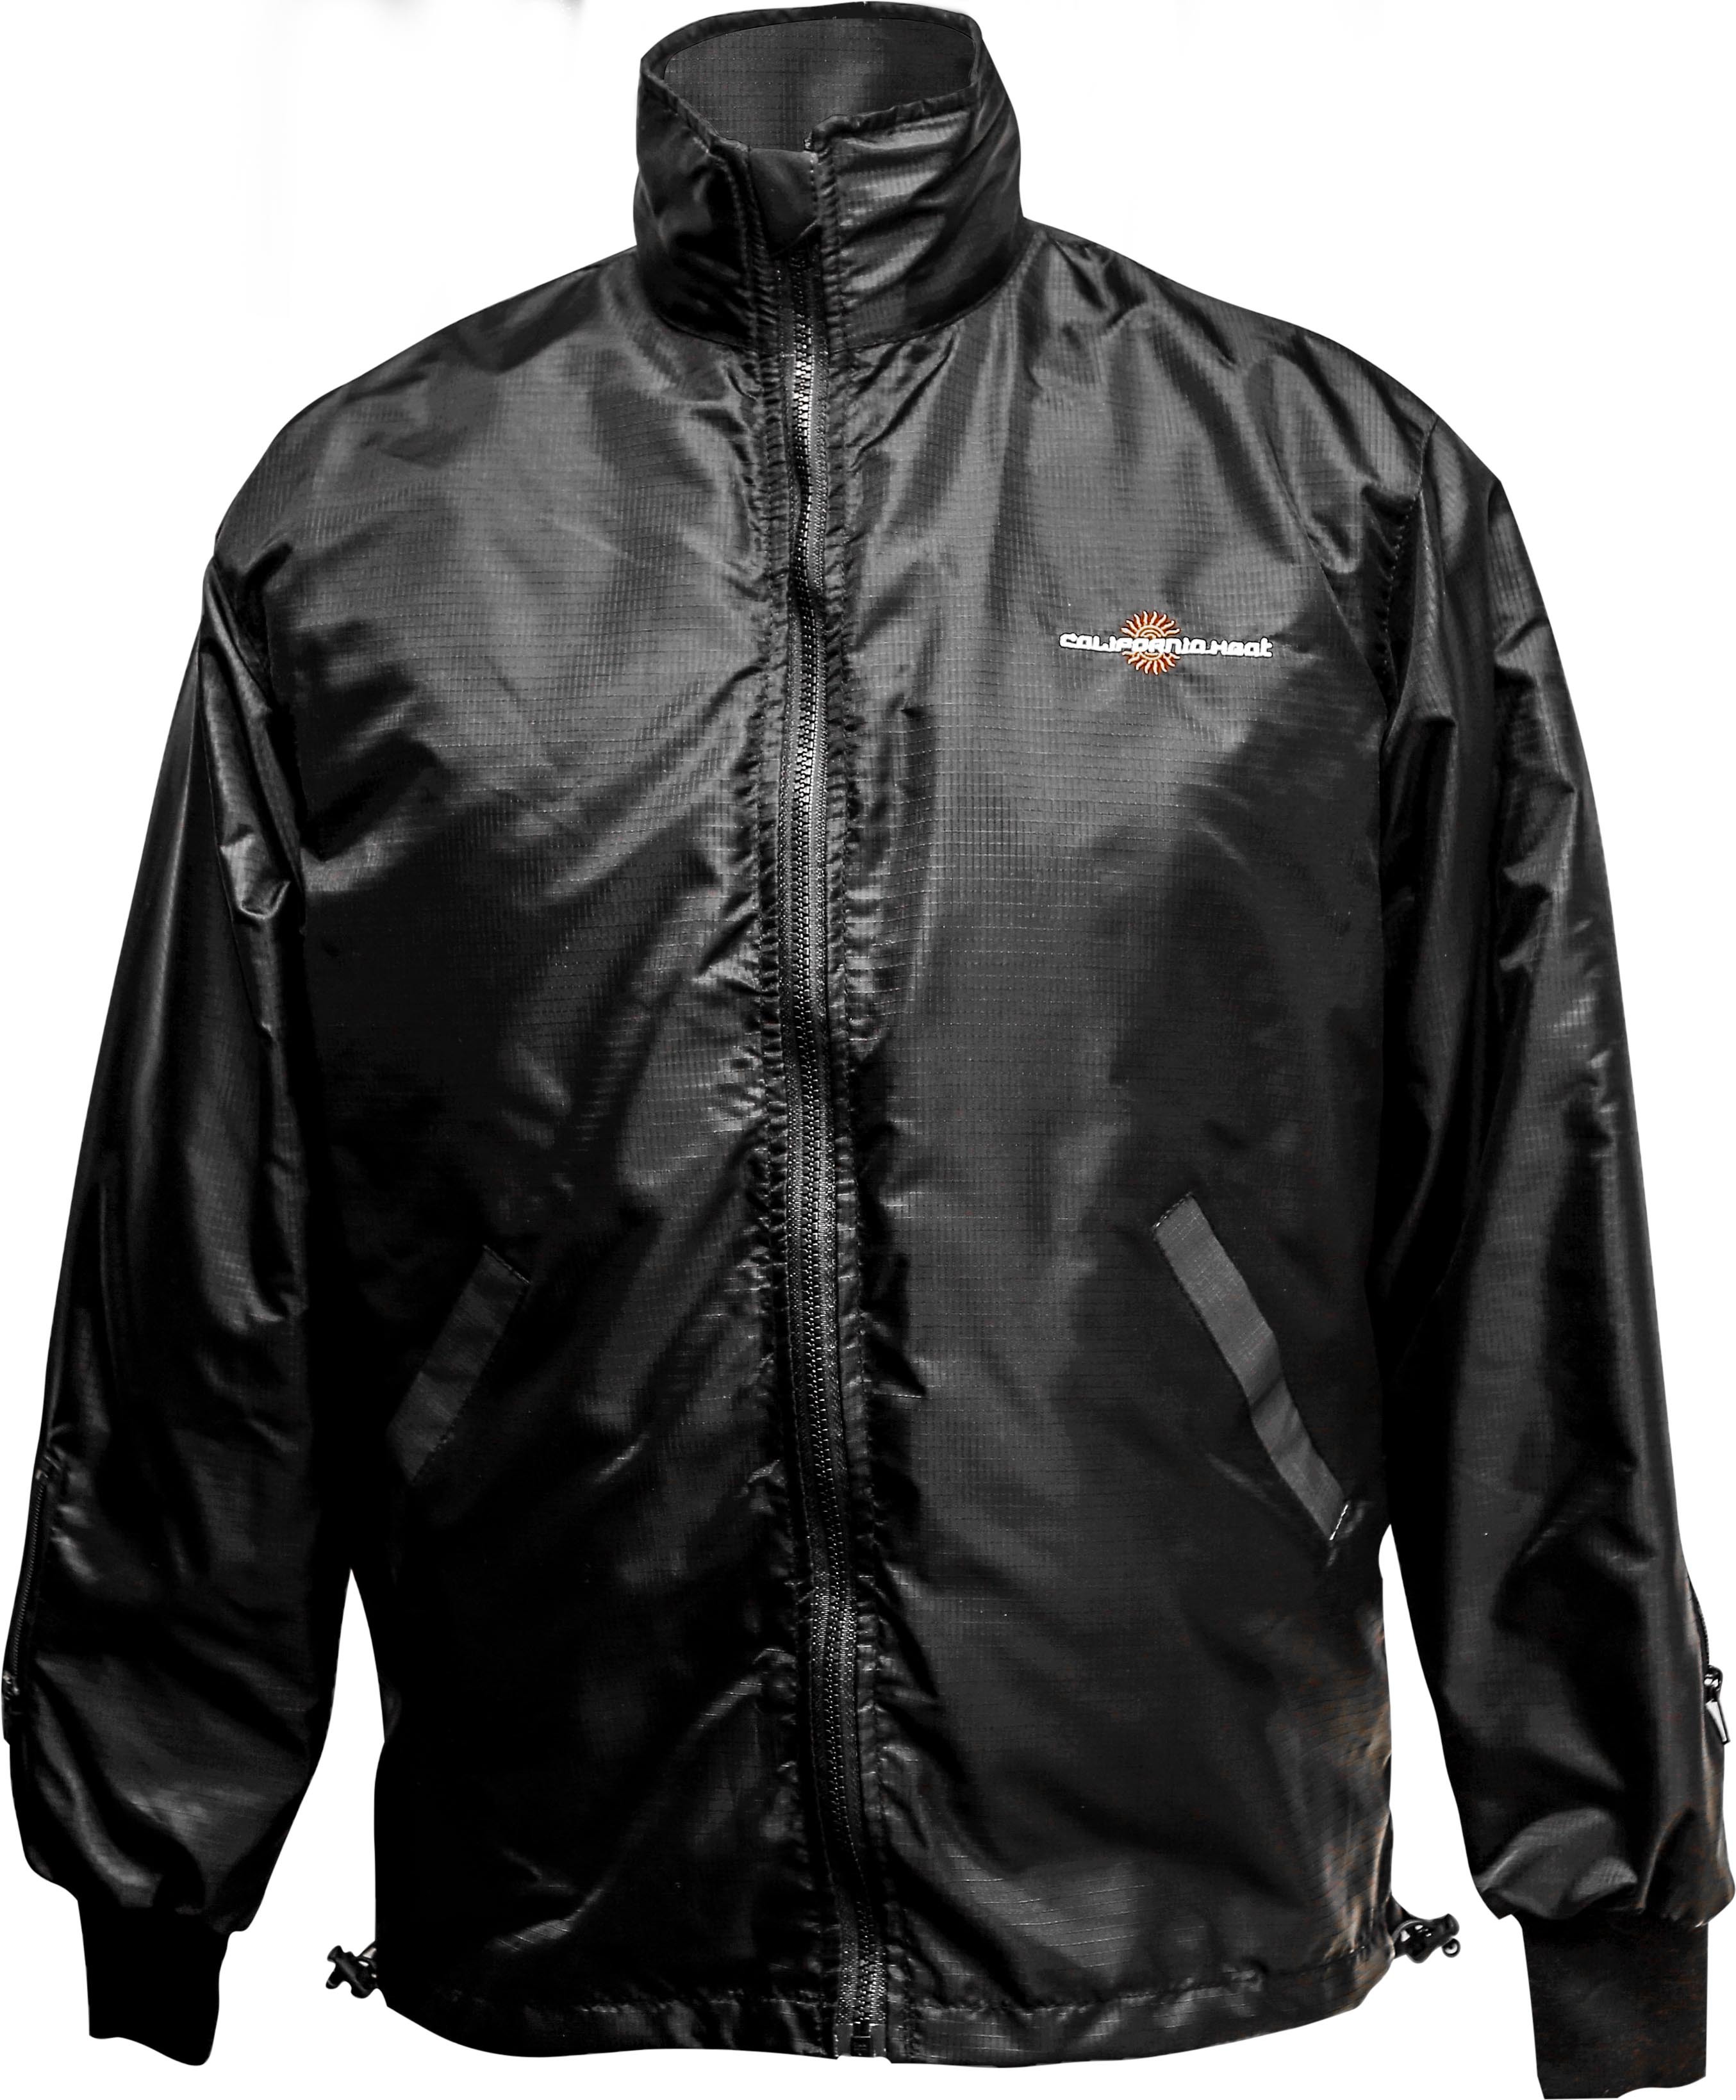 12V Heated Jacket Liner 4X-Large Tall - Click Image to Close